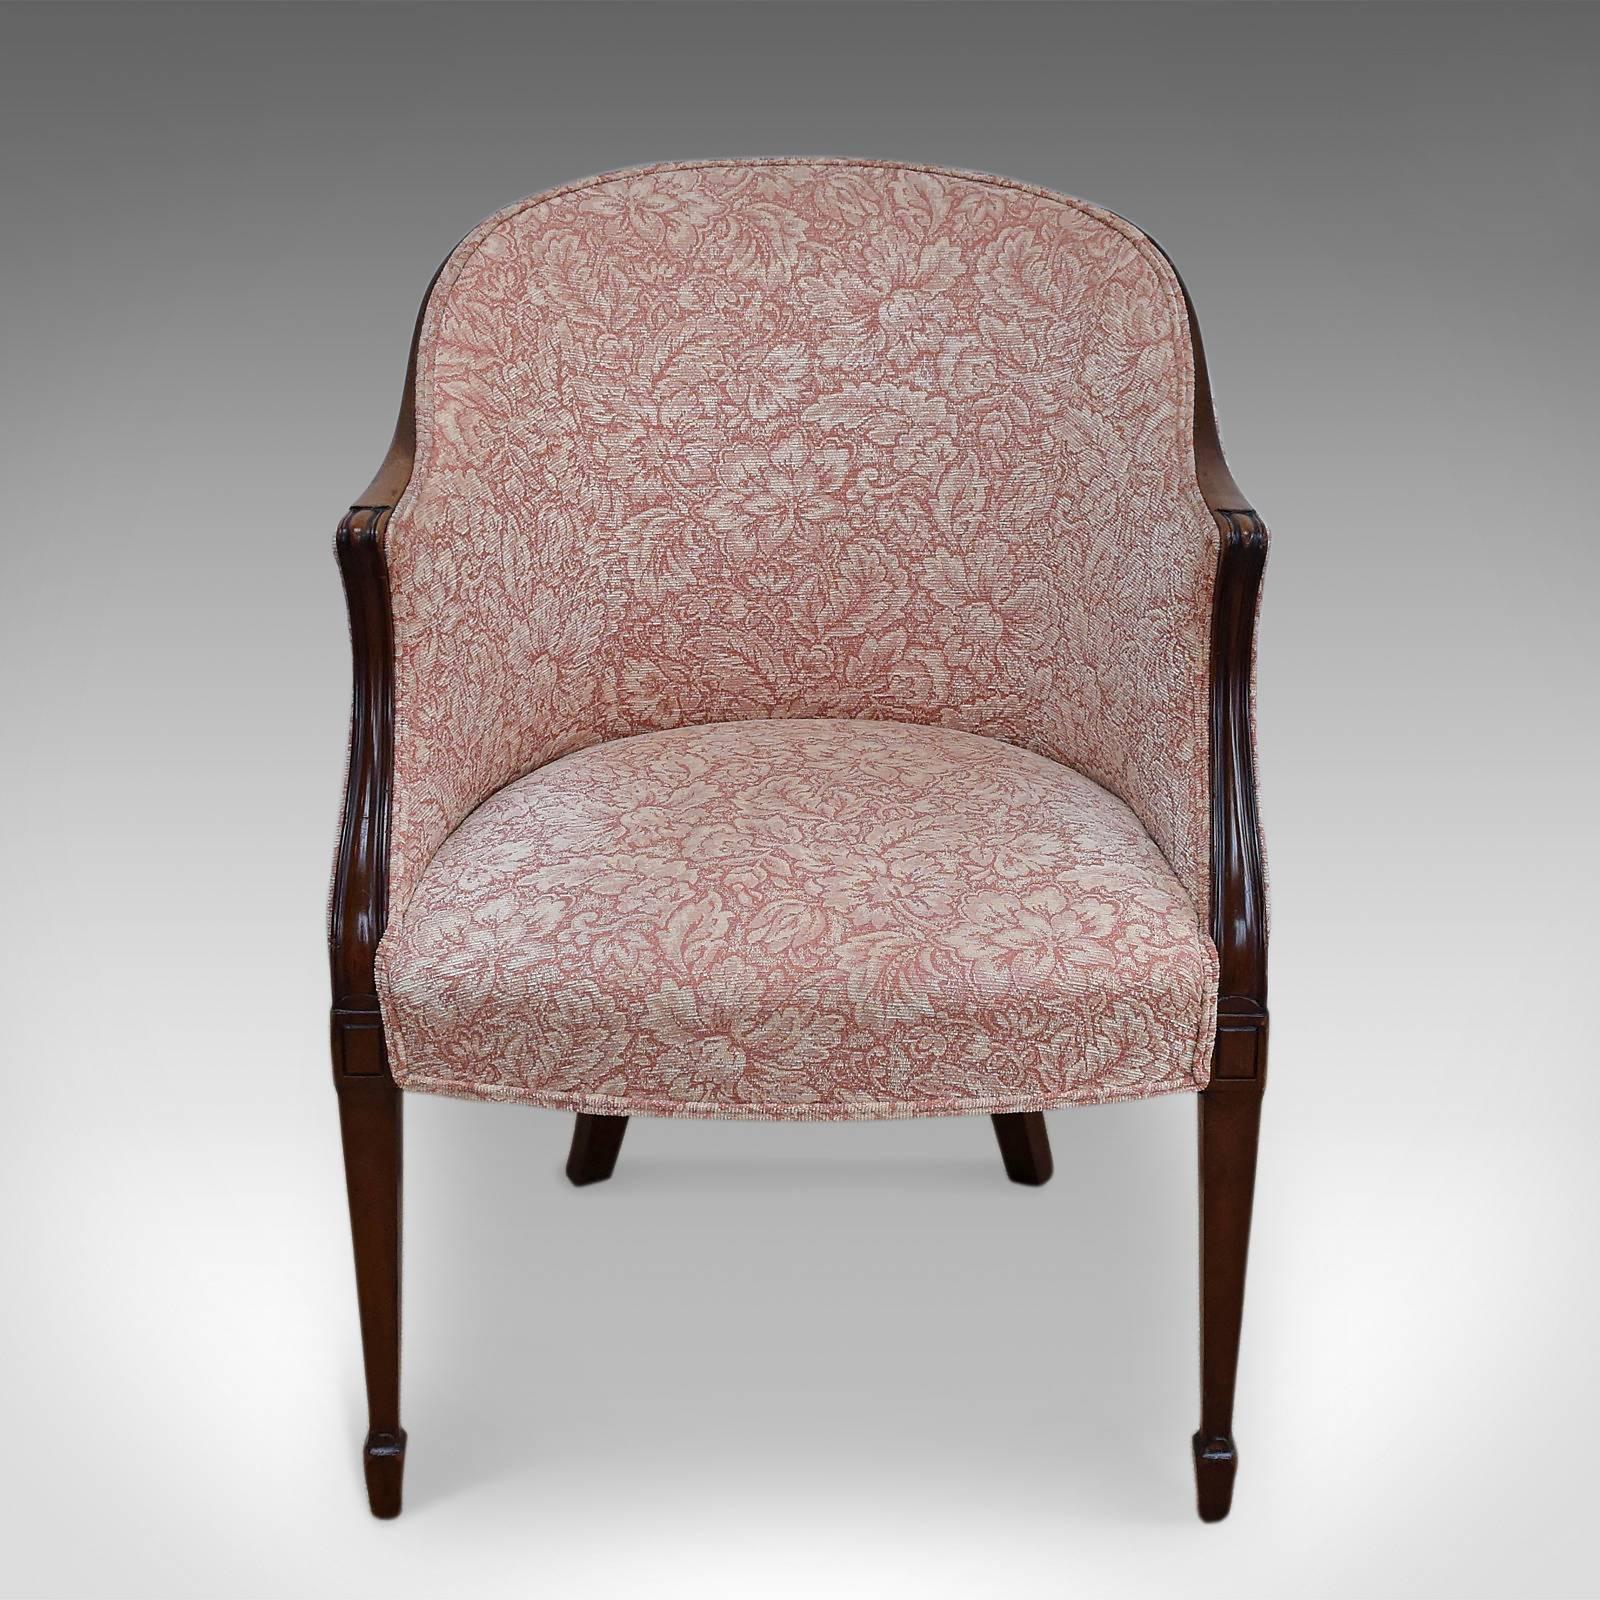 This is an antique Howard and Sons chair dating to the Victorian period.
A beautifully crafted mahogany tub chair in the Georgian manner
By the renowned maker Howard & Sons
An unusual shape rarely found on the market
Provides a